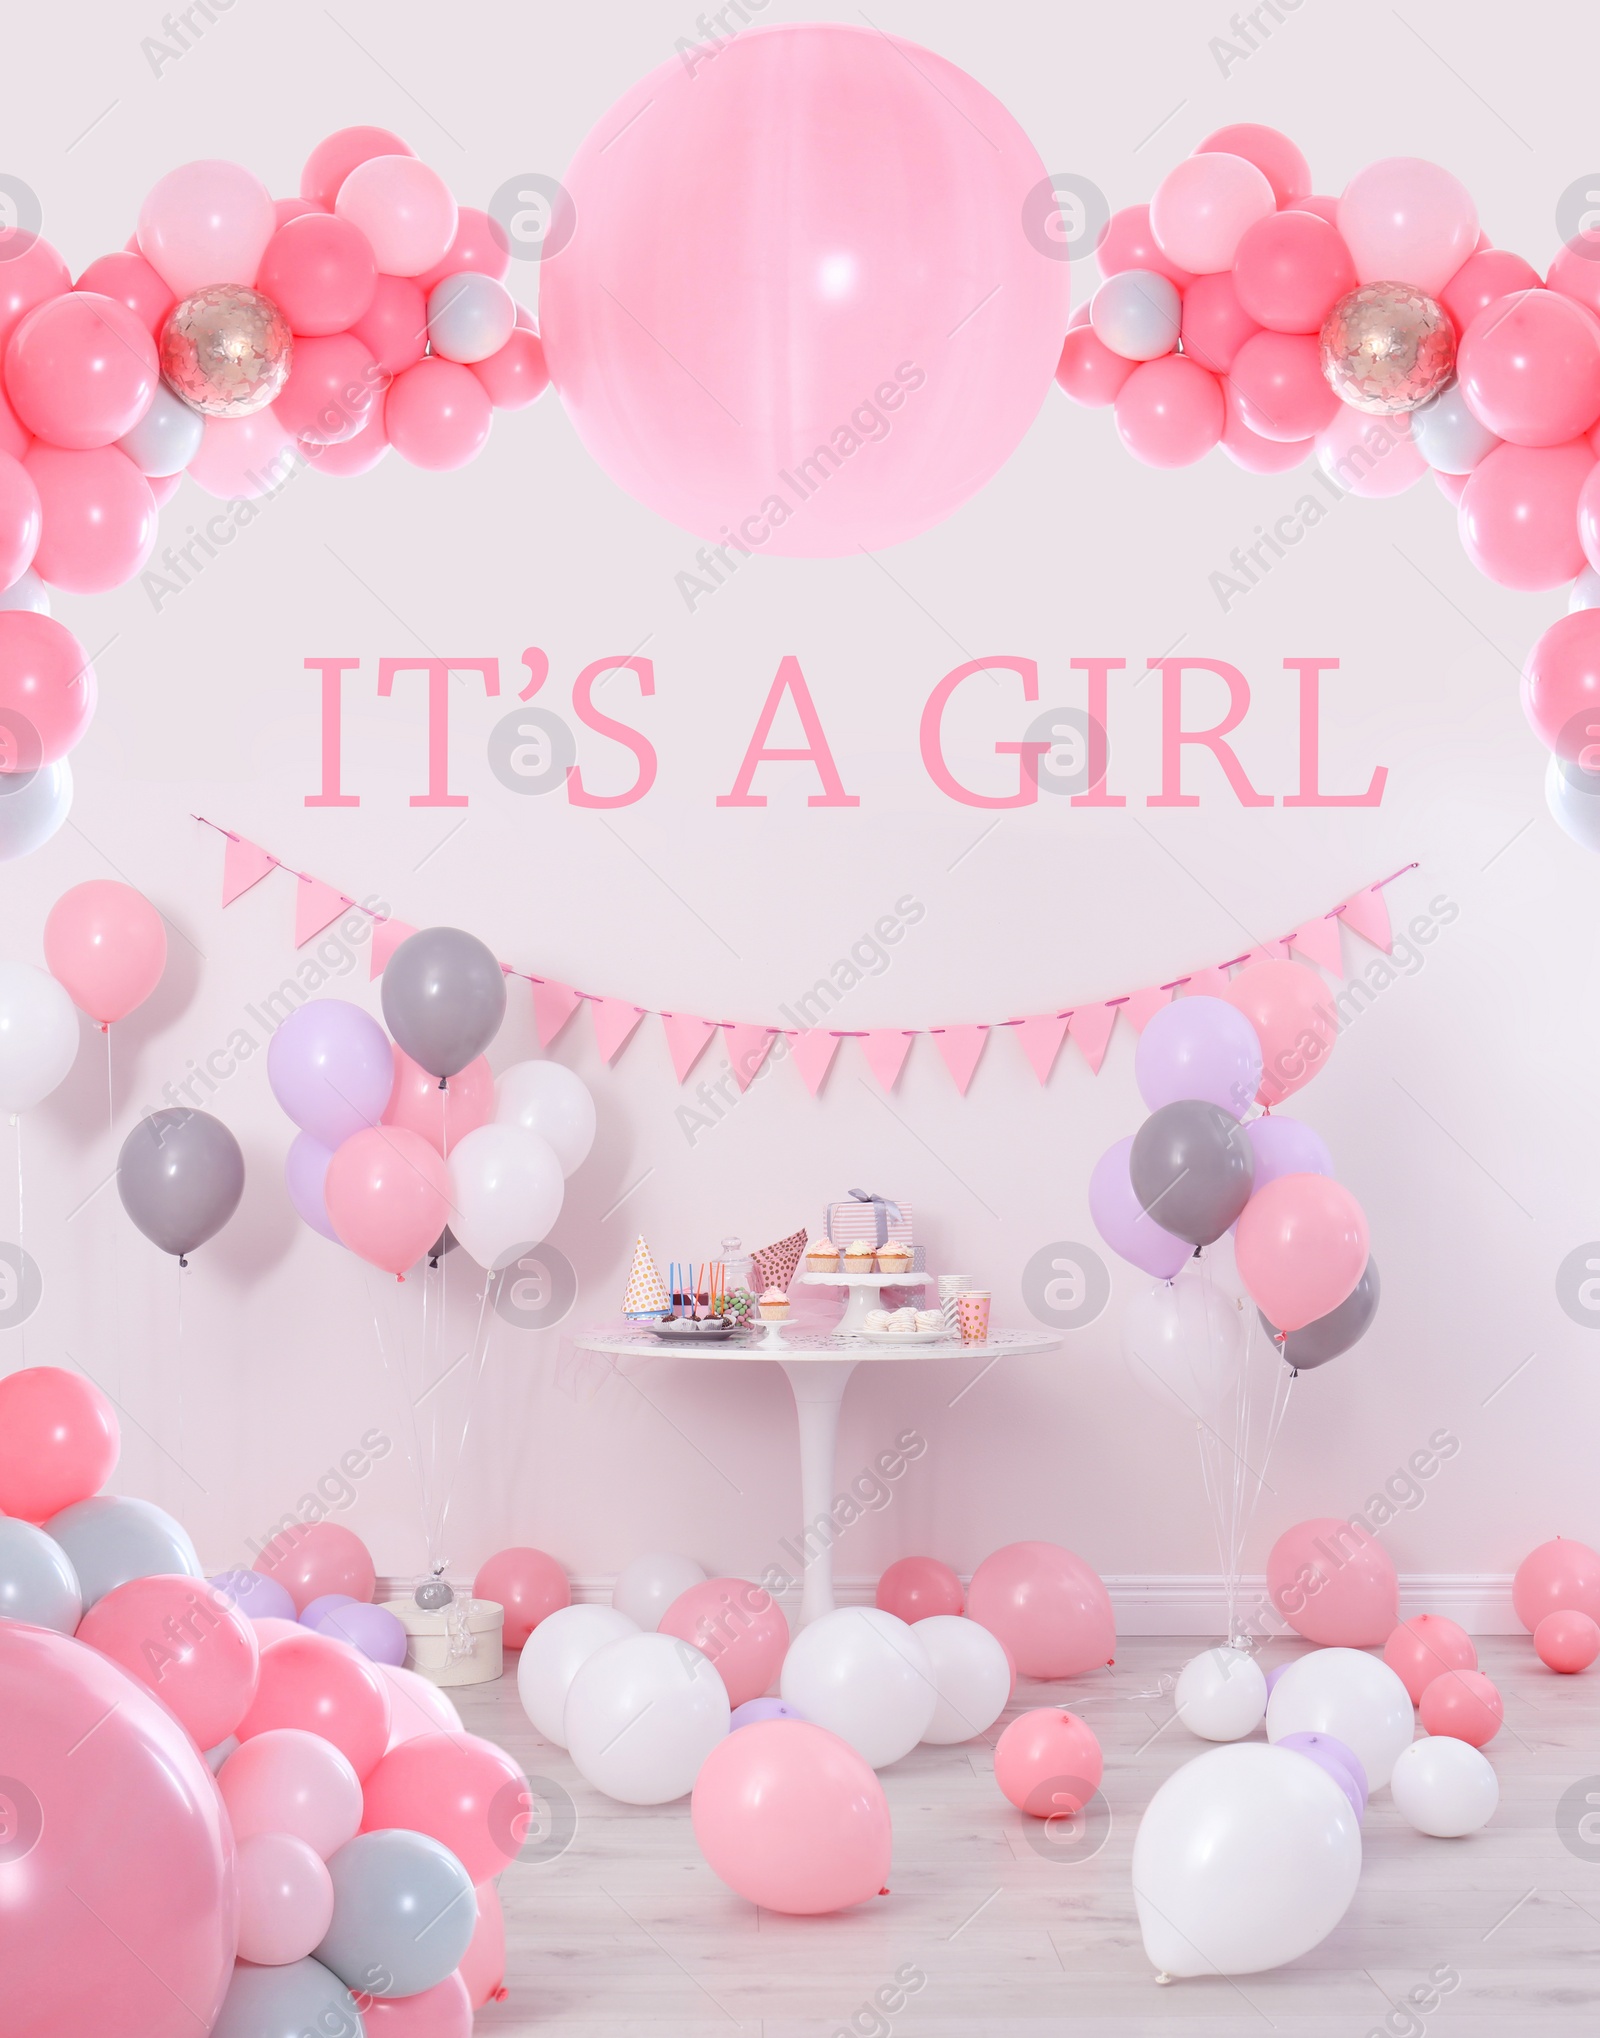 Image of Baby shower party for girl. Tasty treats in room decorated with balloons